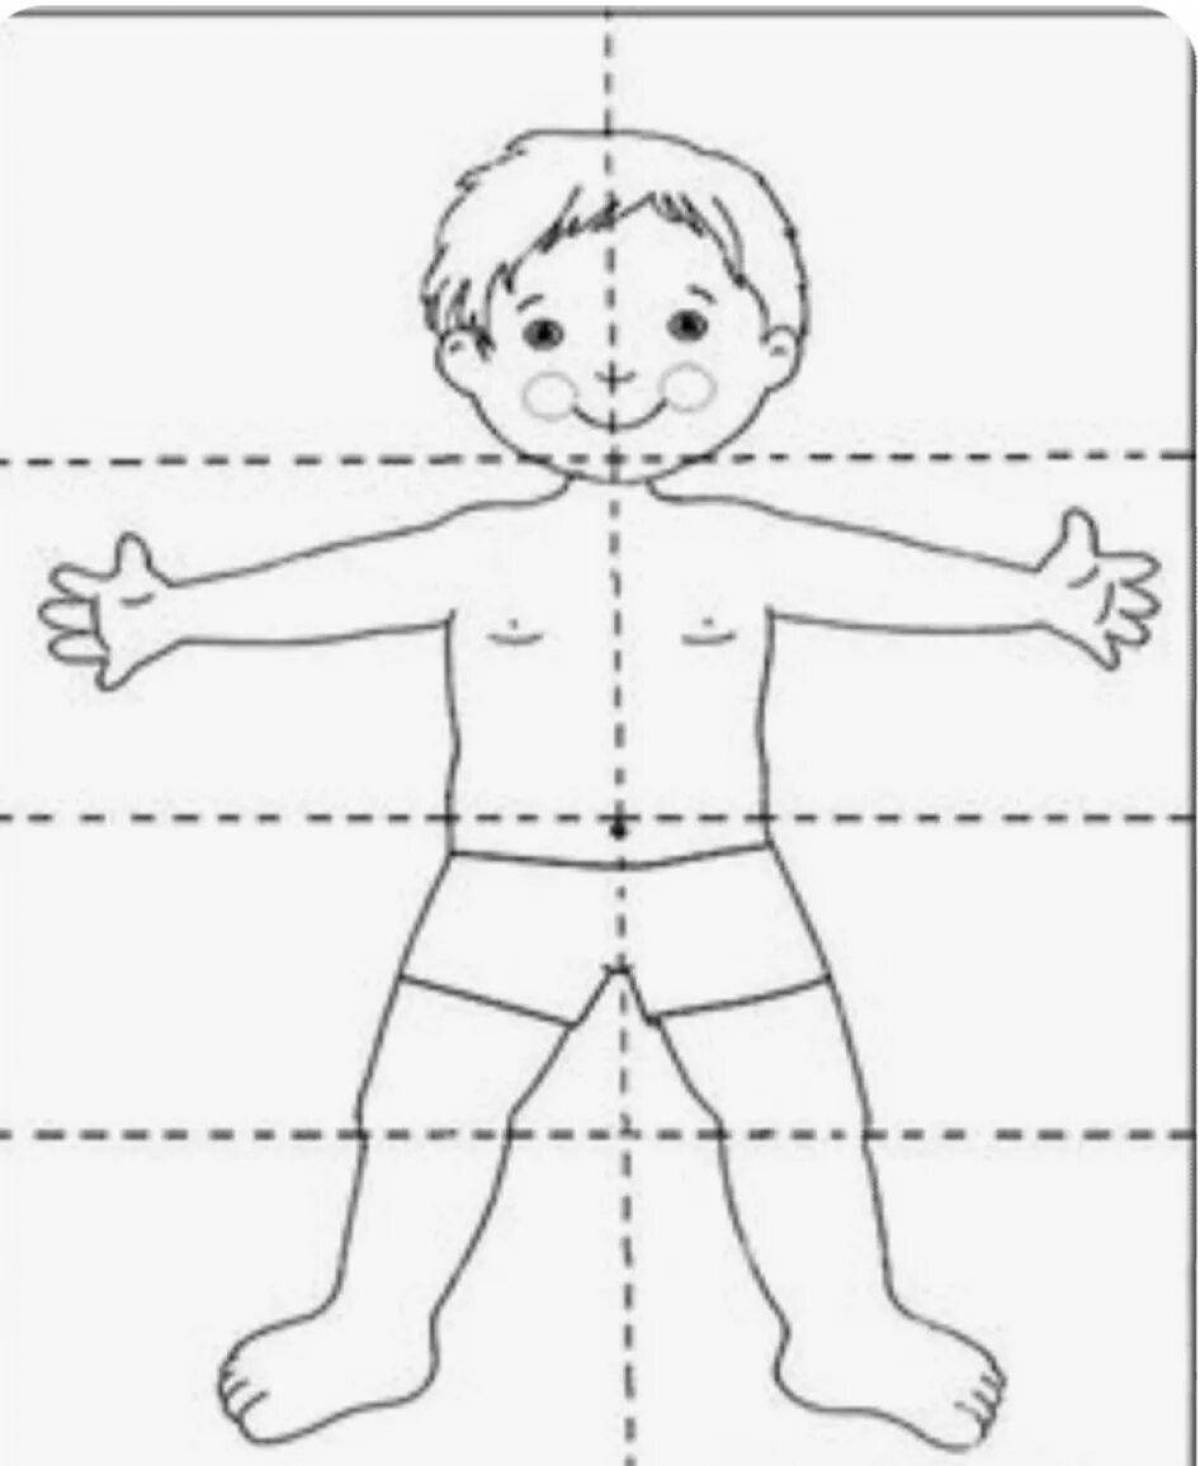 Fun coloring of the structure of the human body for children